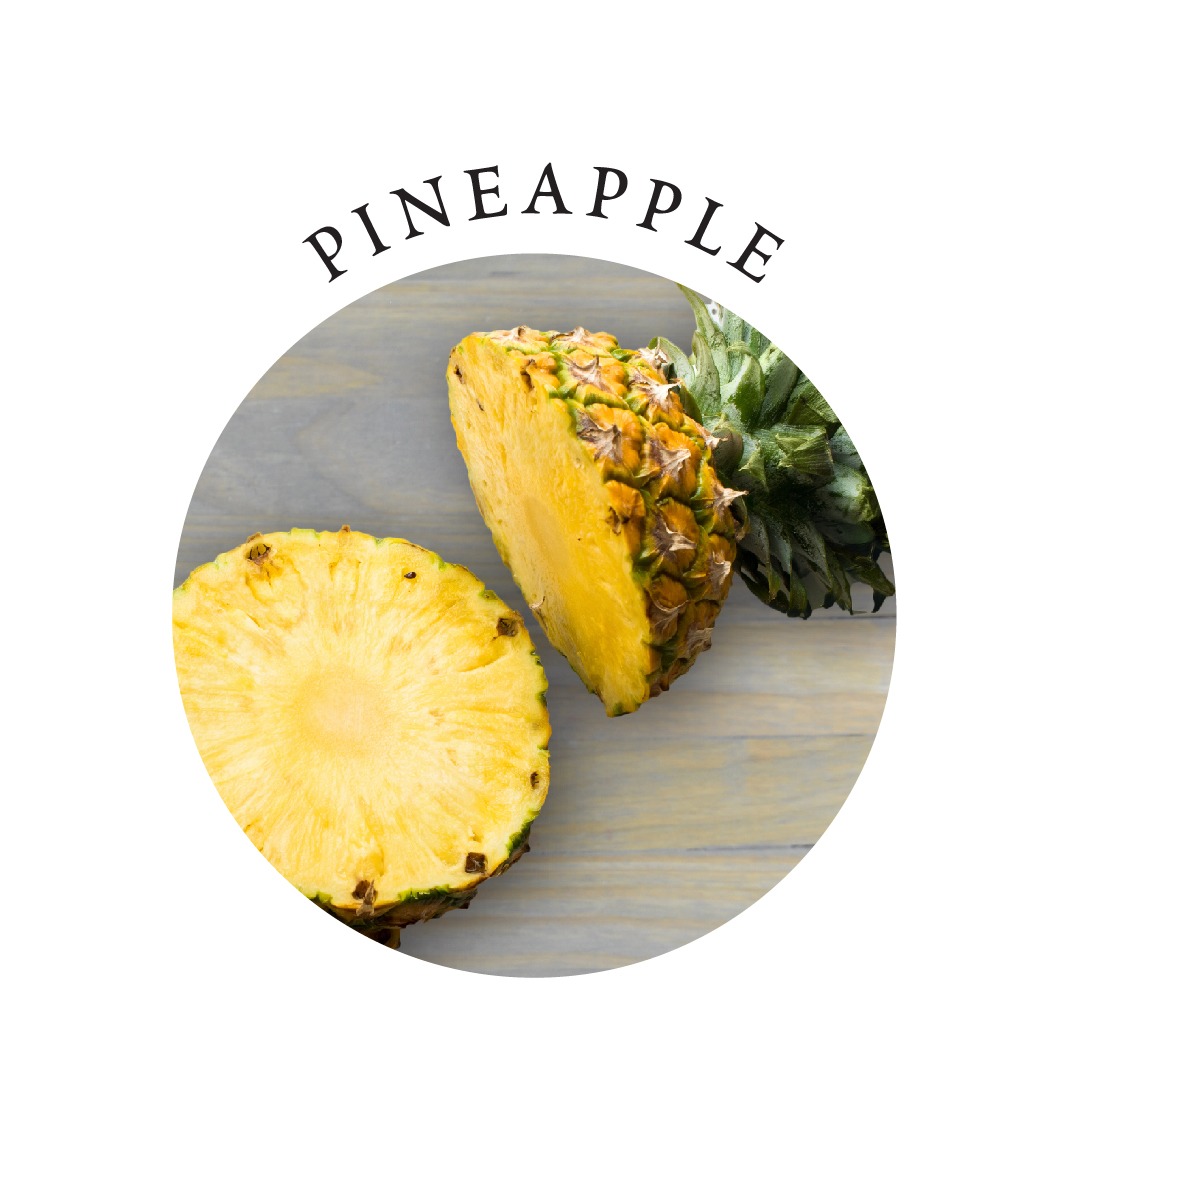 Pineapple Flavored Edible Massage Oil | Shop Earthly Body